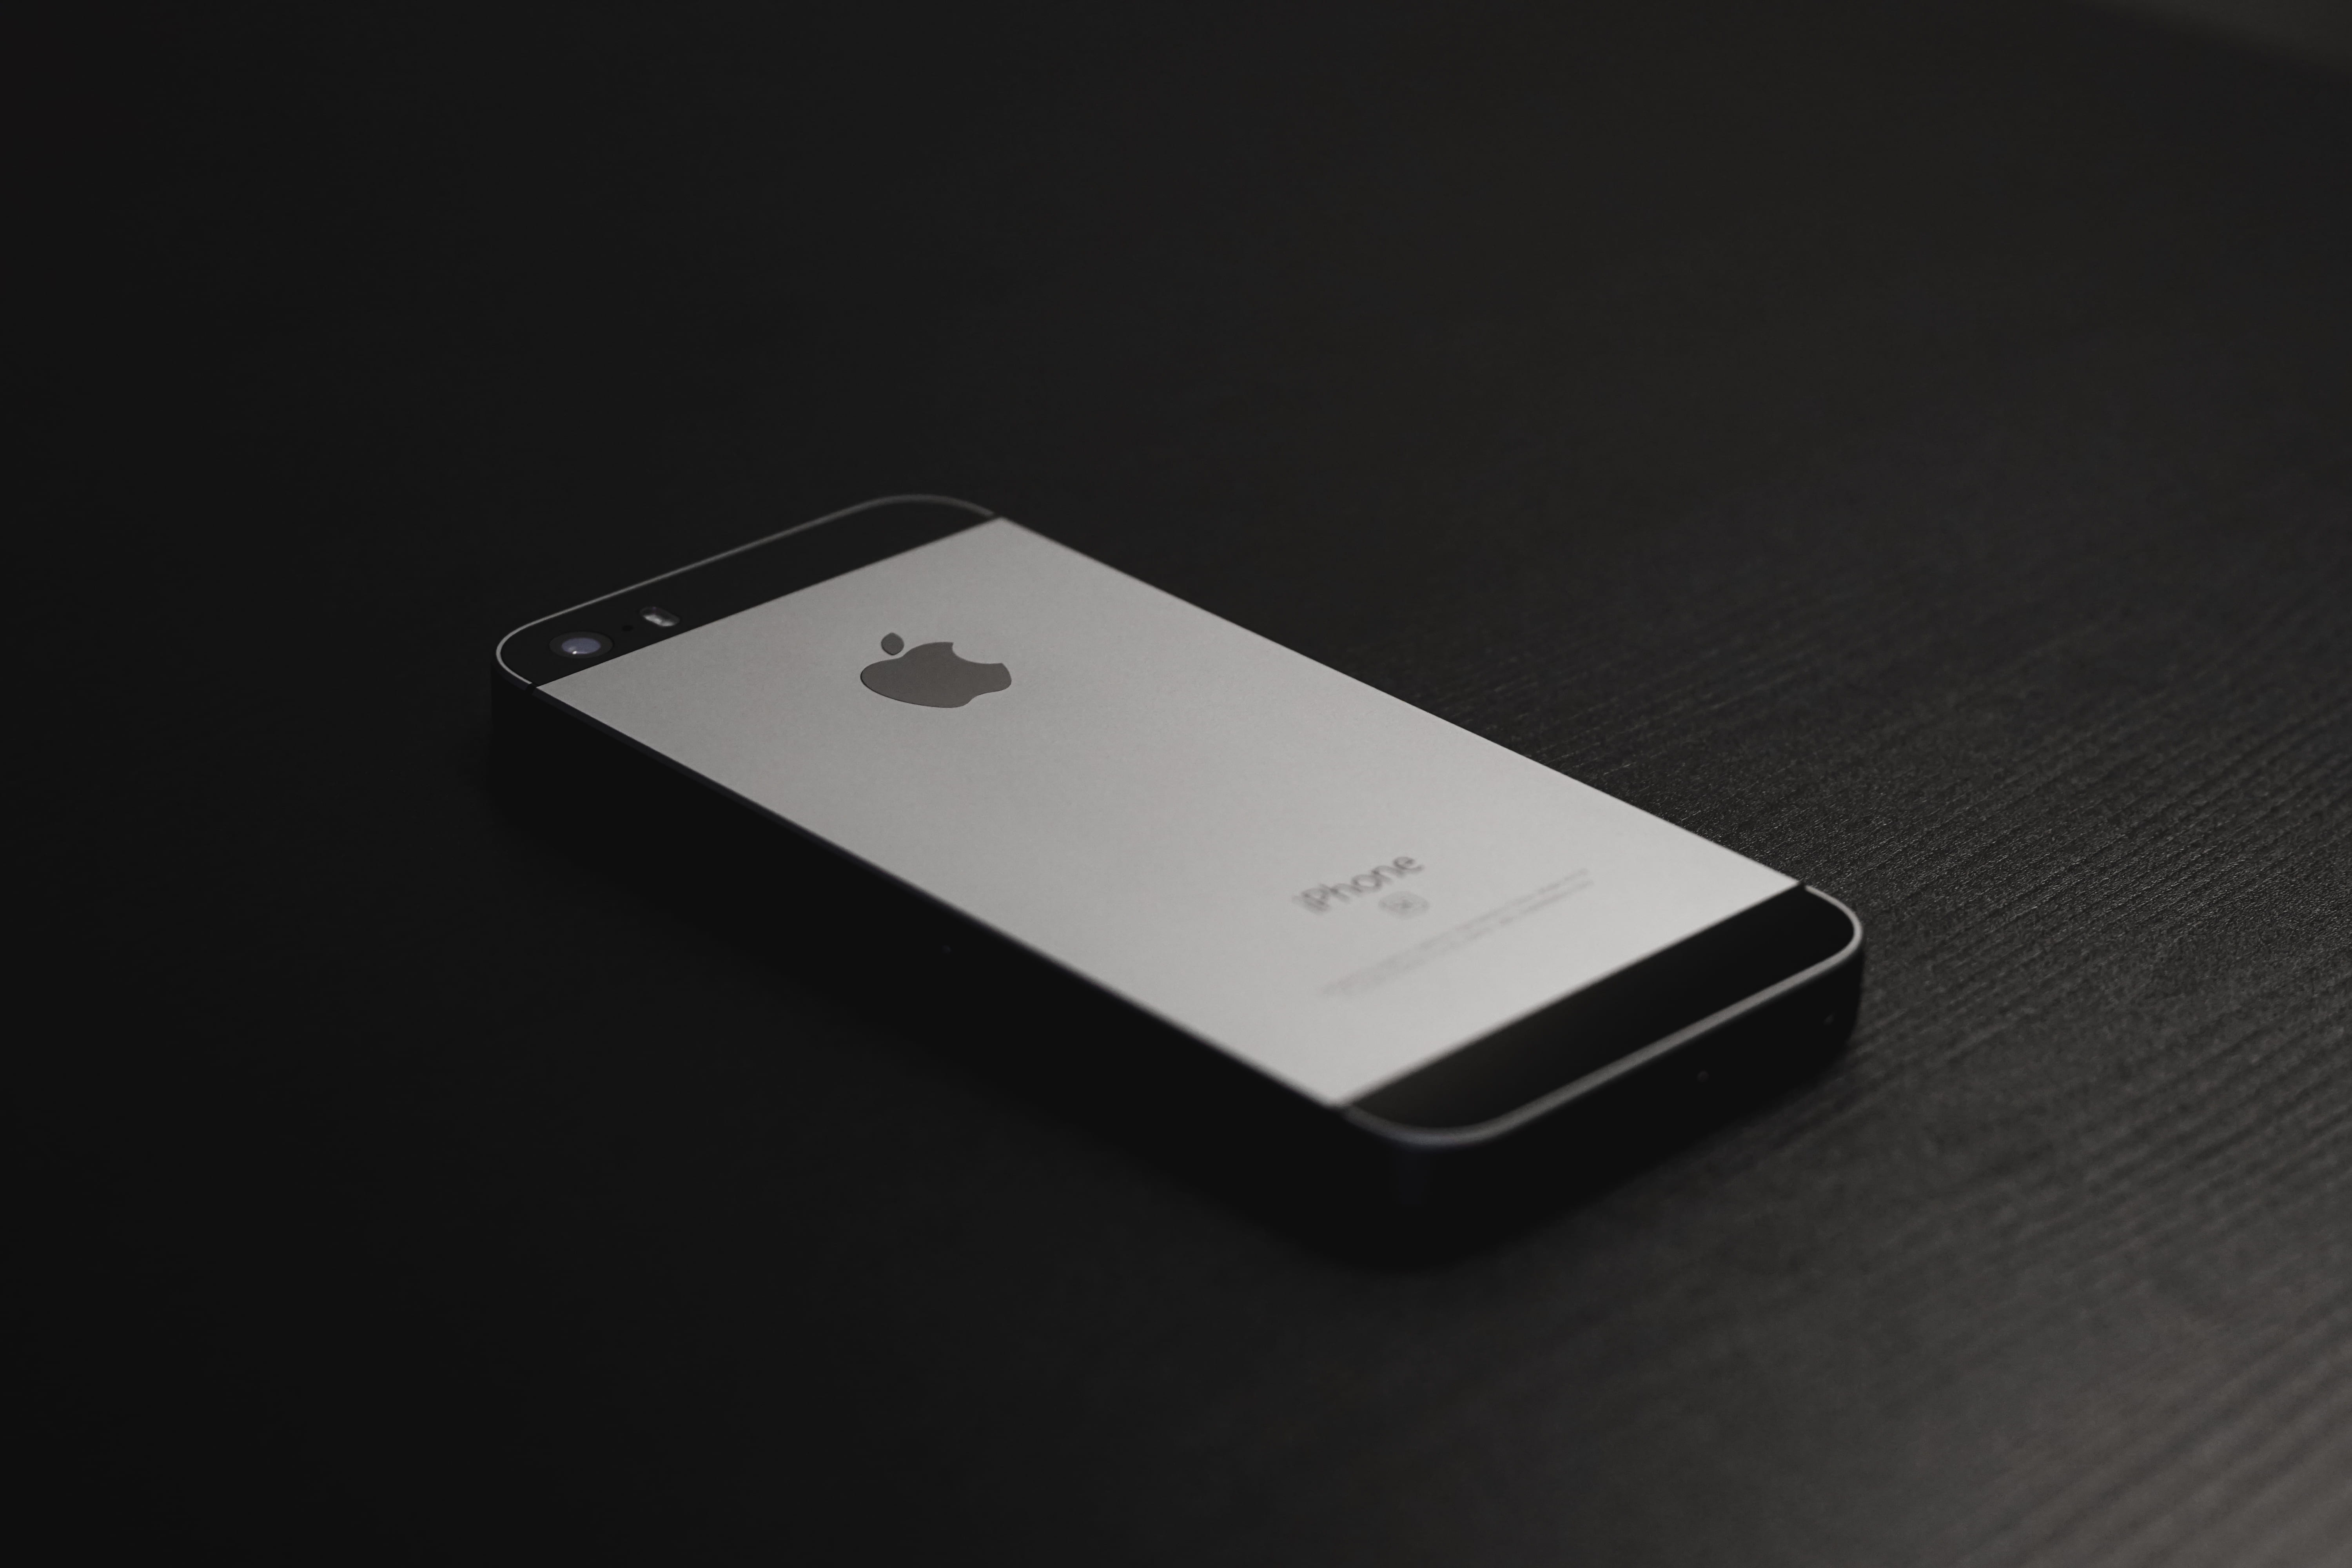 space gray iPhone 5s, space gray iPhone SE, iphone5, product shoot